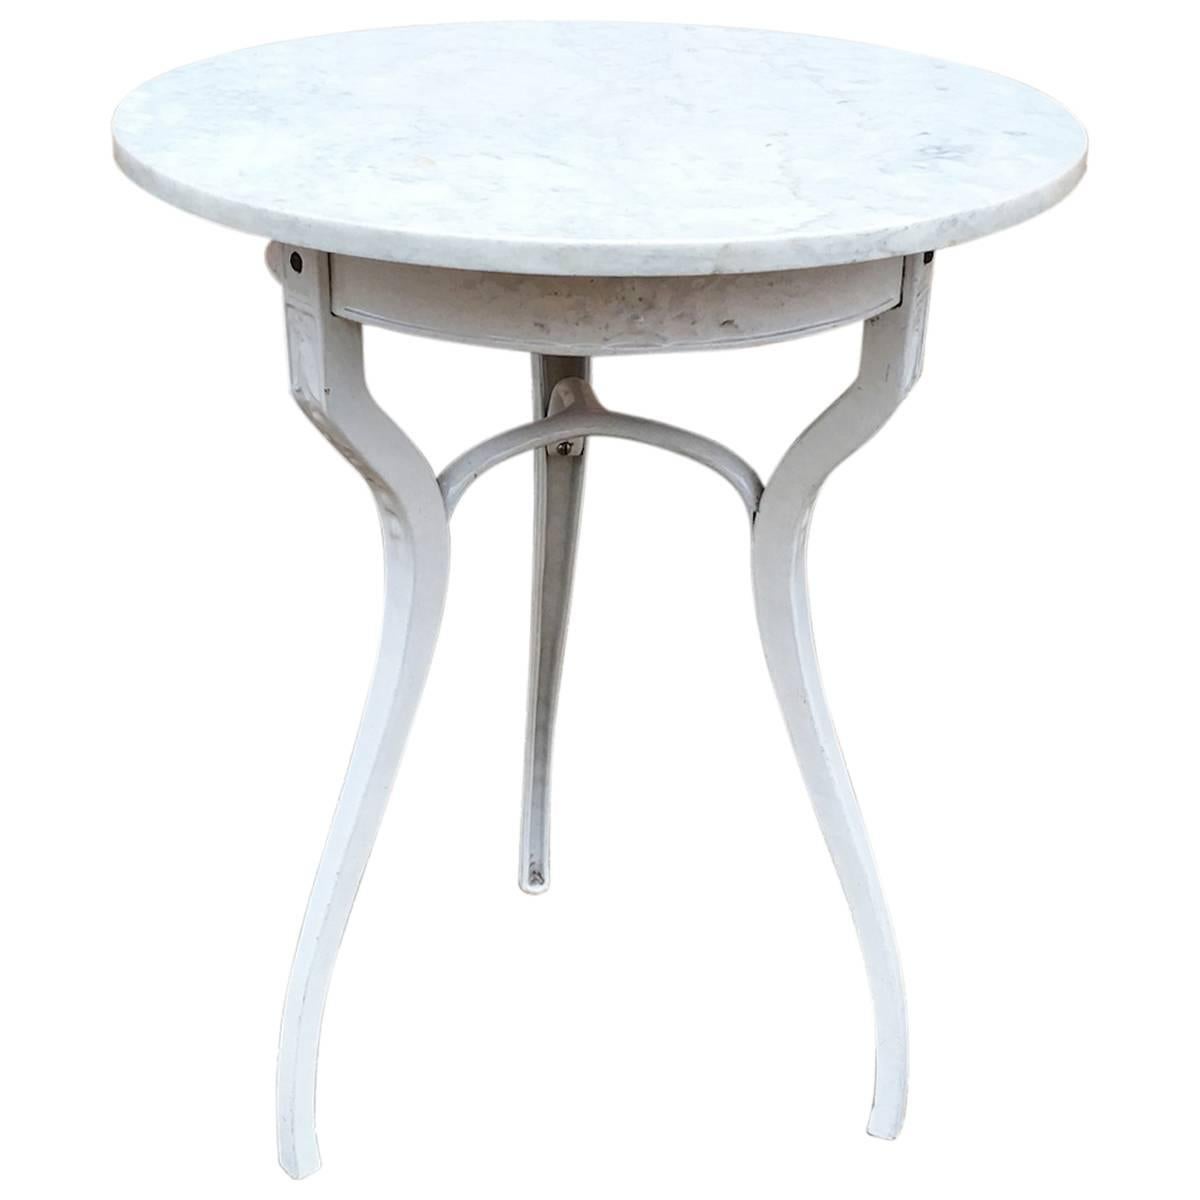 Industrial White Marble Café Table with Baked Enamel Base